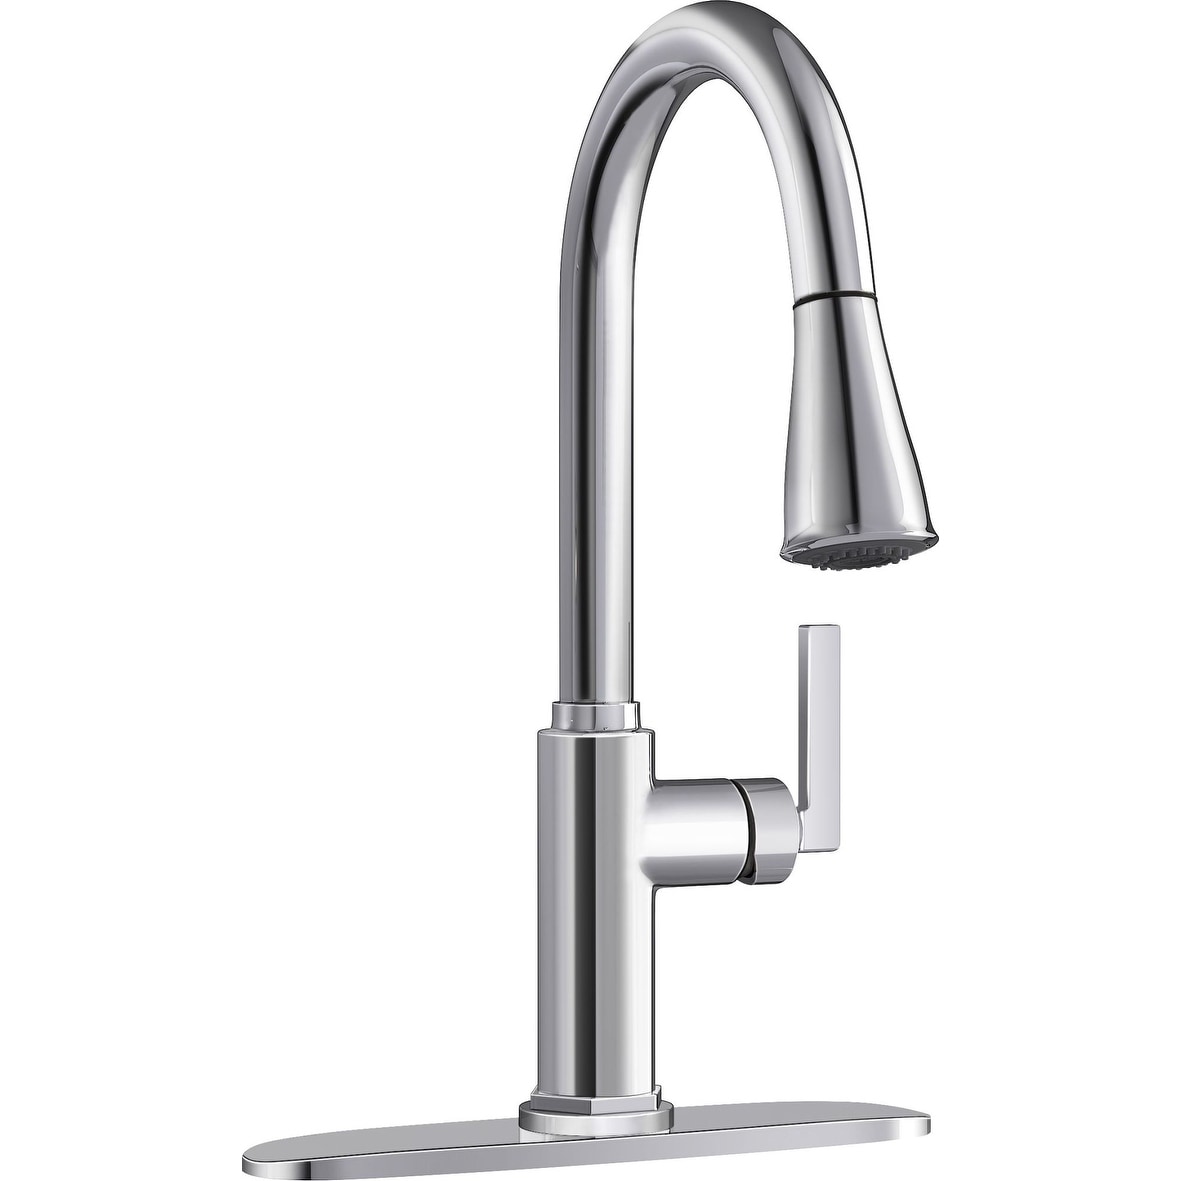 PROFLO Pixley 1.8 GPM Single Hole Pull Down Kitchen Faucet - Includes